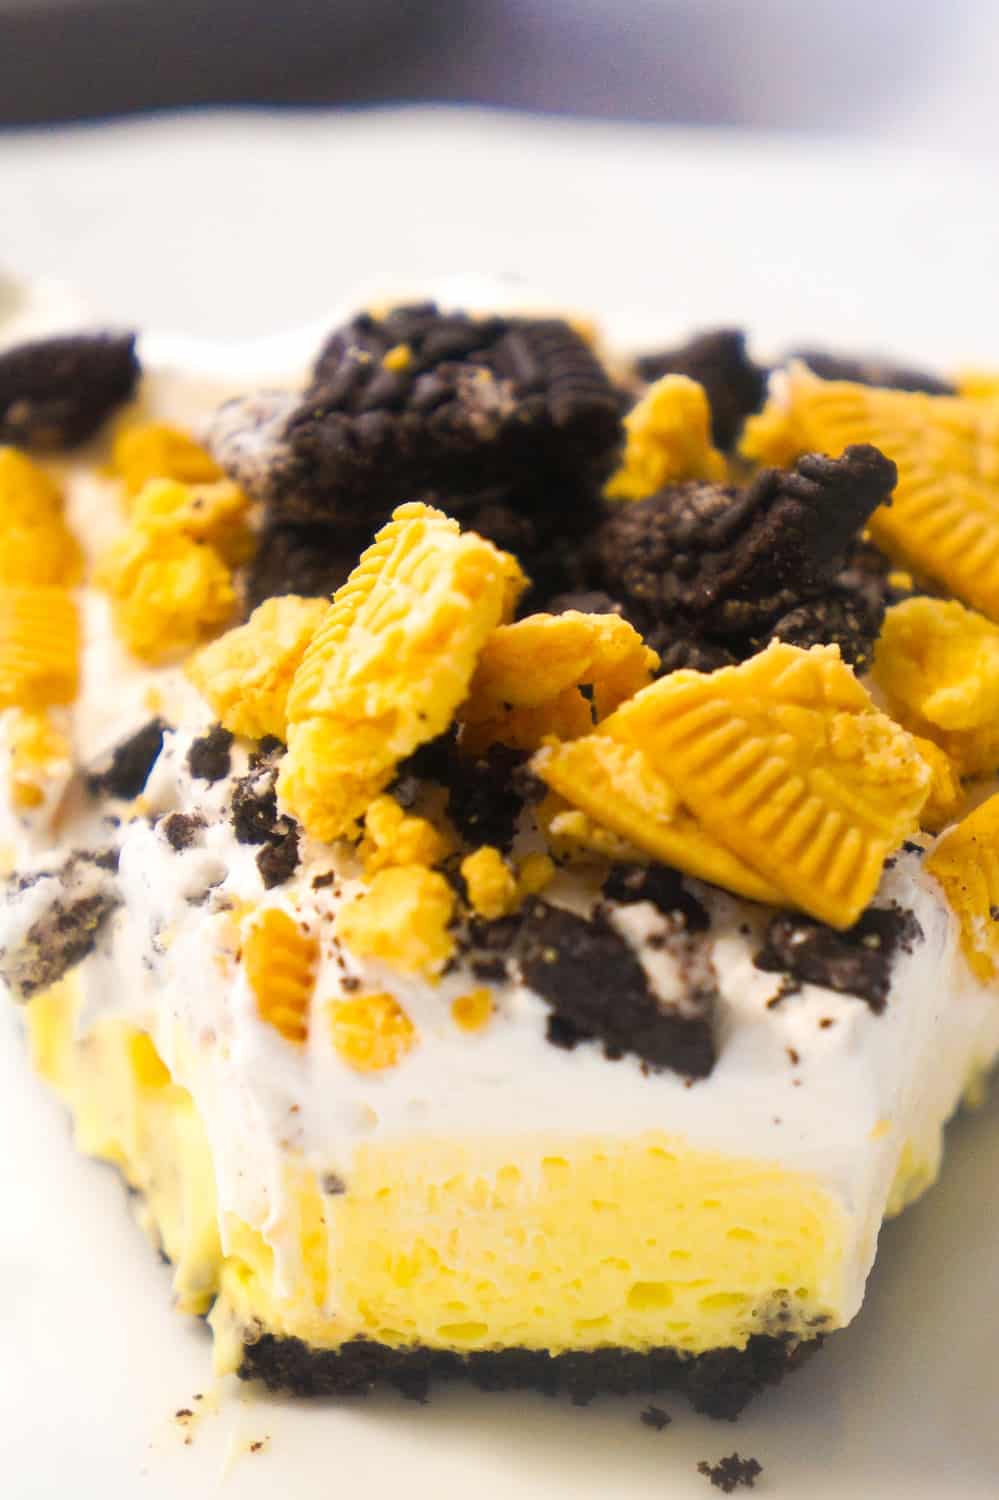 No Bake Lemon Oreo Pie is an easy dessert recipe perfect for summer. A store bought Oreo cookie crust is filled with instant lemon pudding and Cool Whip and topped with crumbled Oreo cookies.